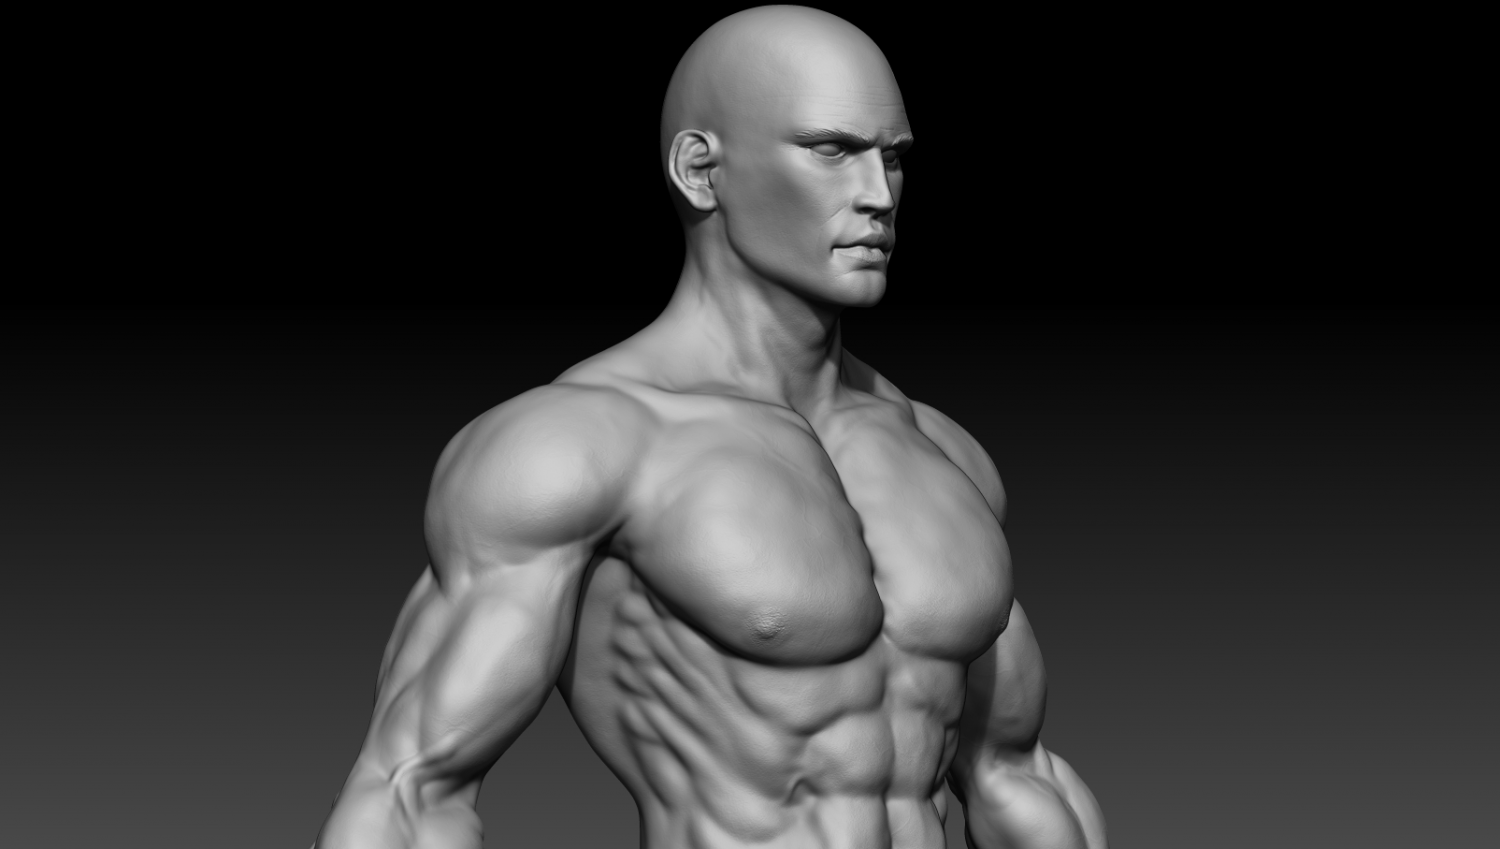 3d muscular chest zbrush